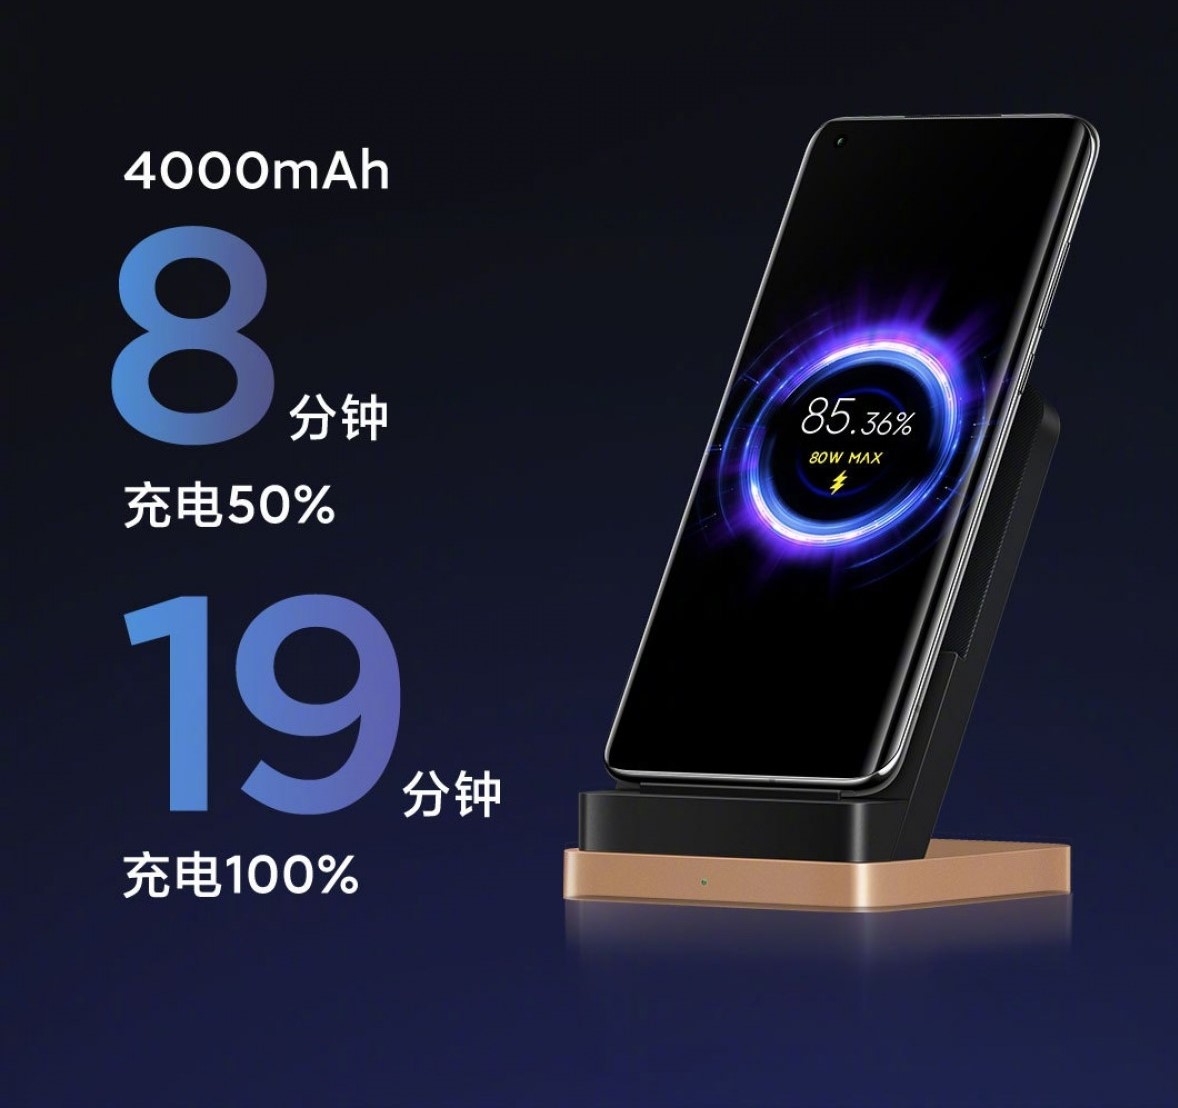 Xiaomi unveils 80W Wireless Charger; Can charge 4,000 mAh battery in 19 minutes